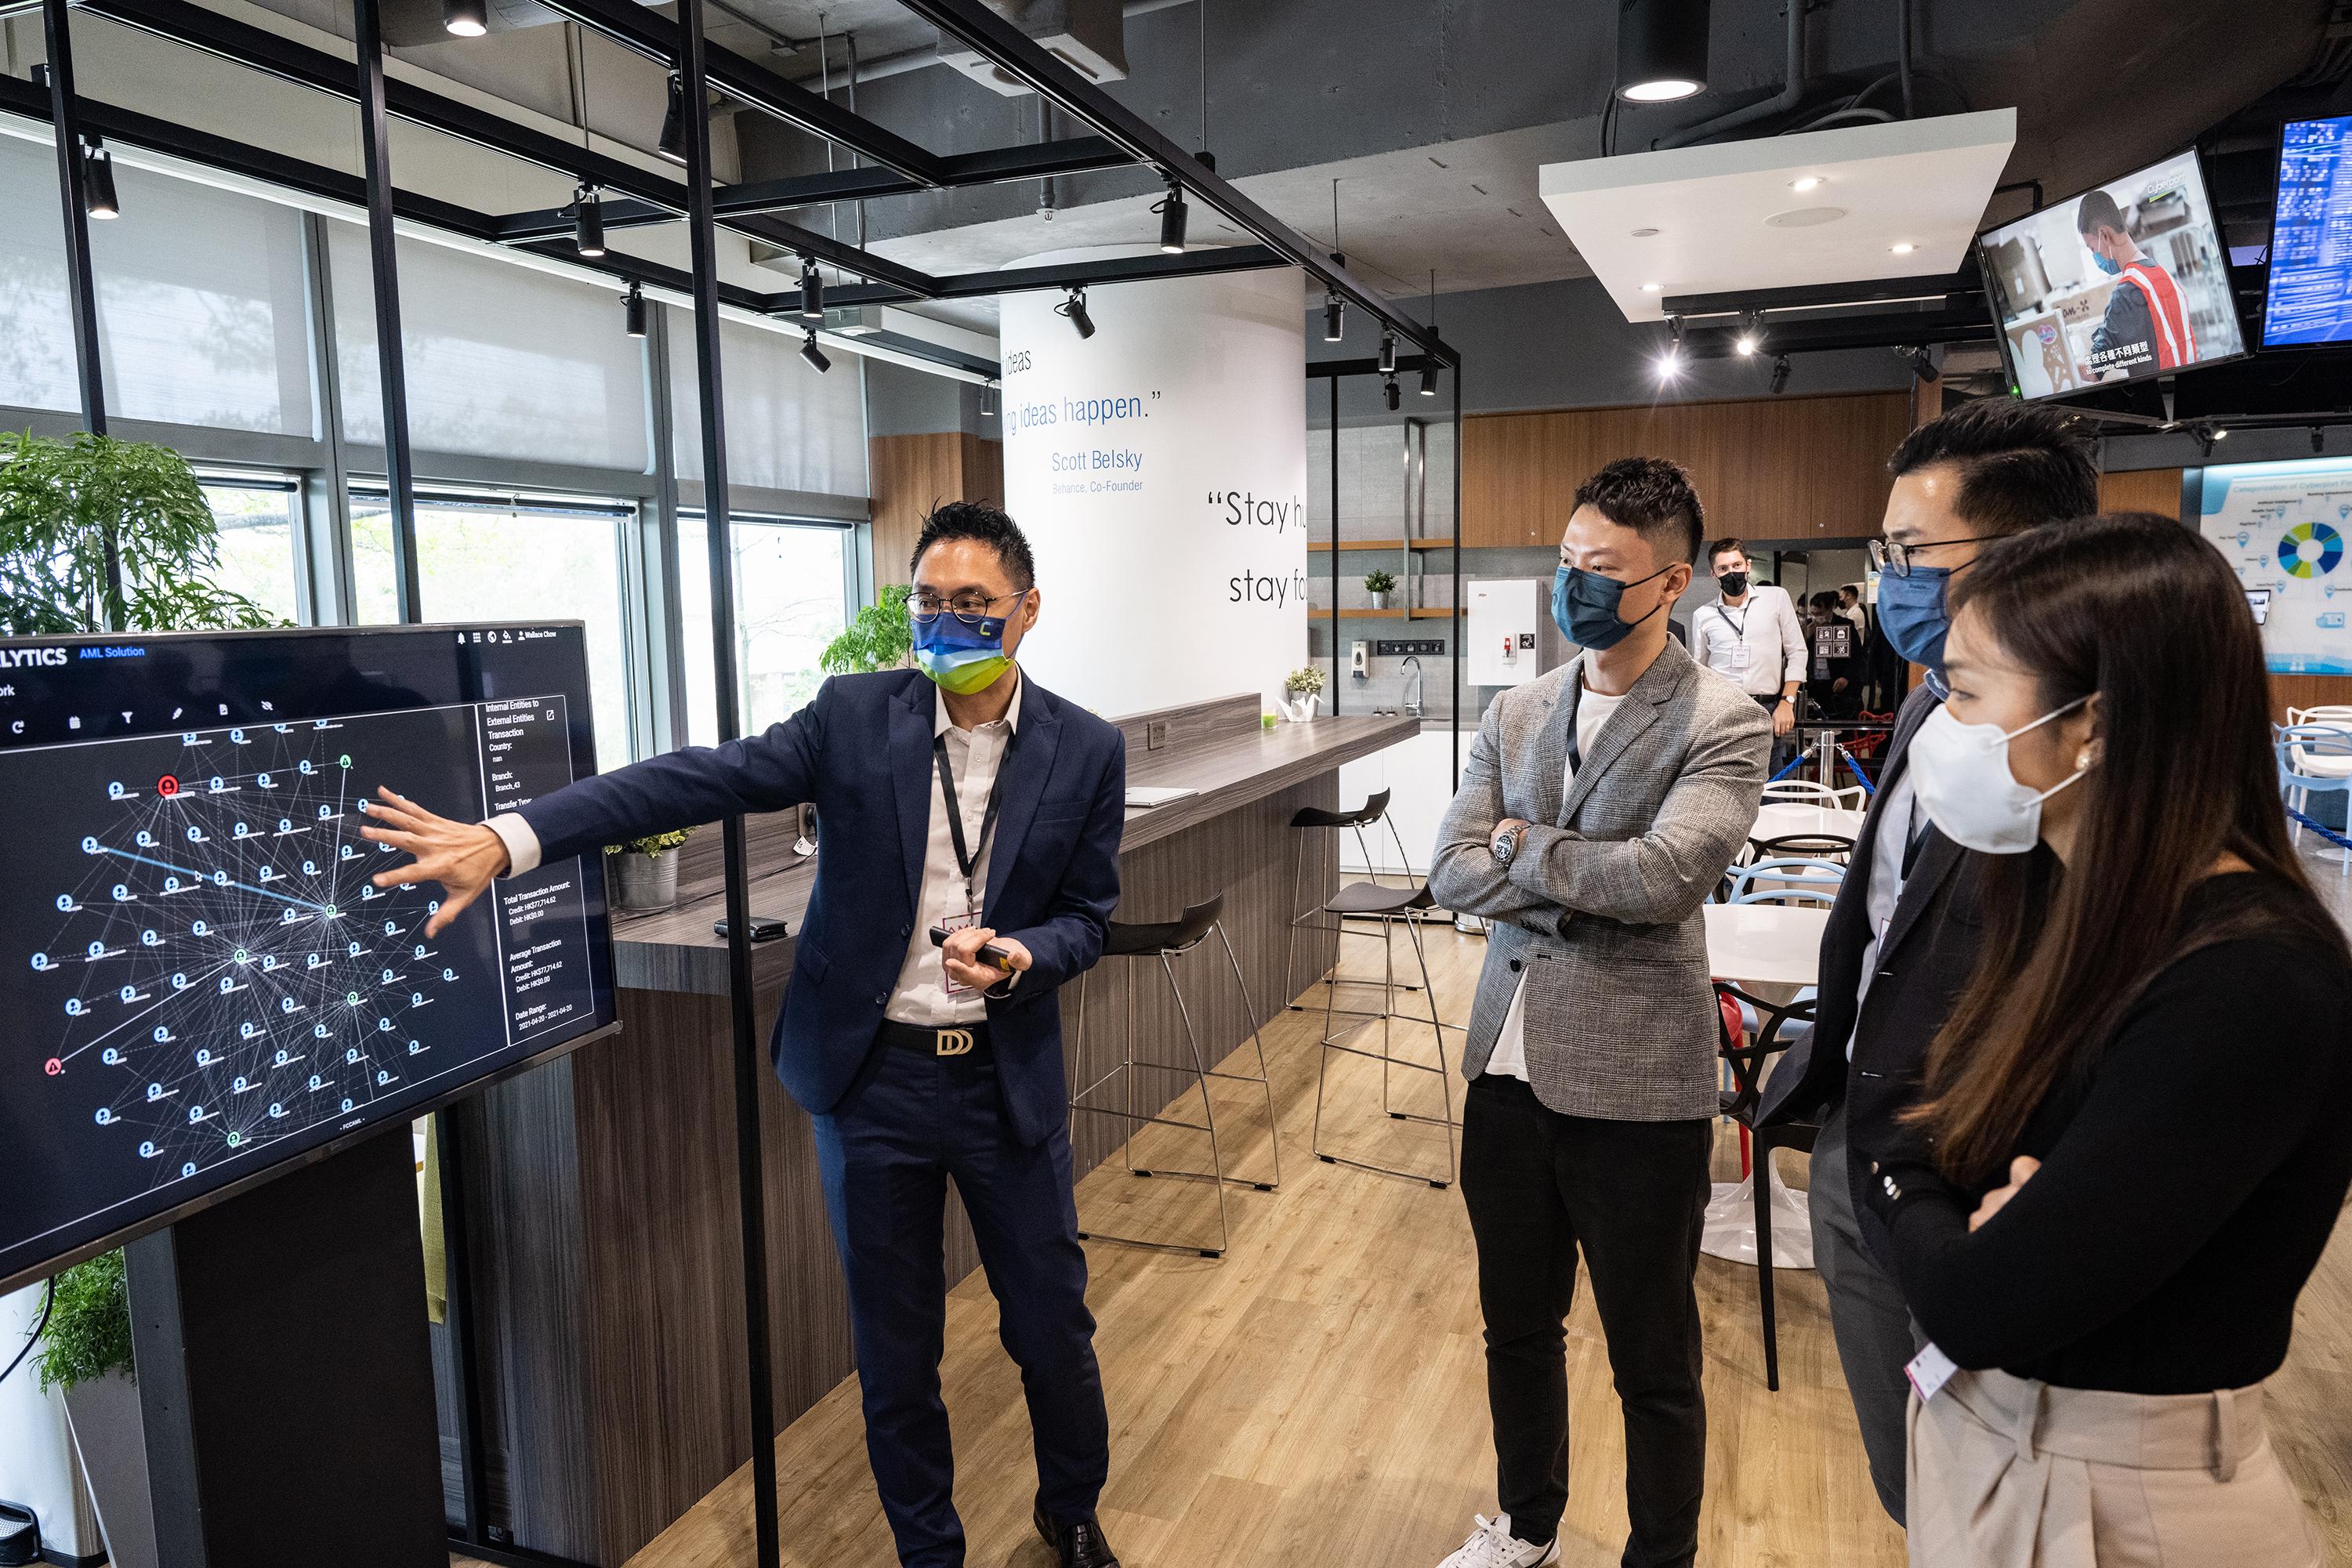 The Hong Kong Monetary Authority and Cyberport co-hosted the third Anti-Money Laundering Regtech Lab today (November 24), with support from Deloitte. Photo shows technology companies in Cyberport demonstrating relevant Regtech tools and services to participating banks at Regtech Connect.